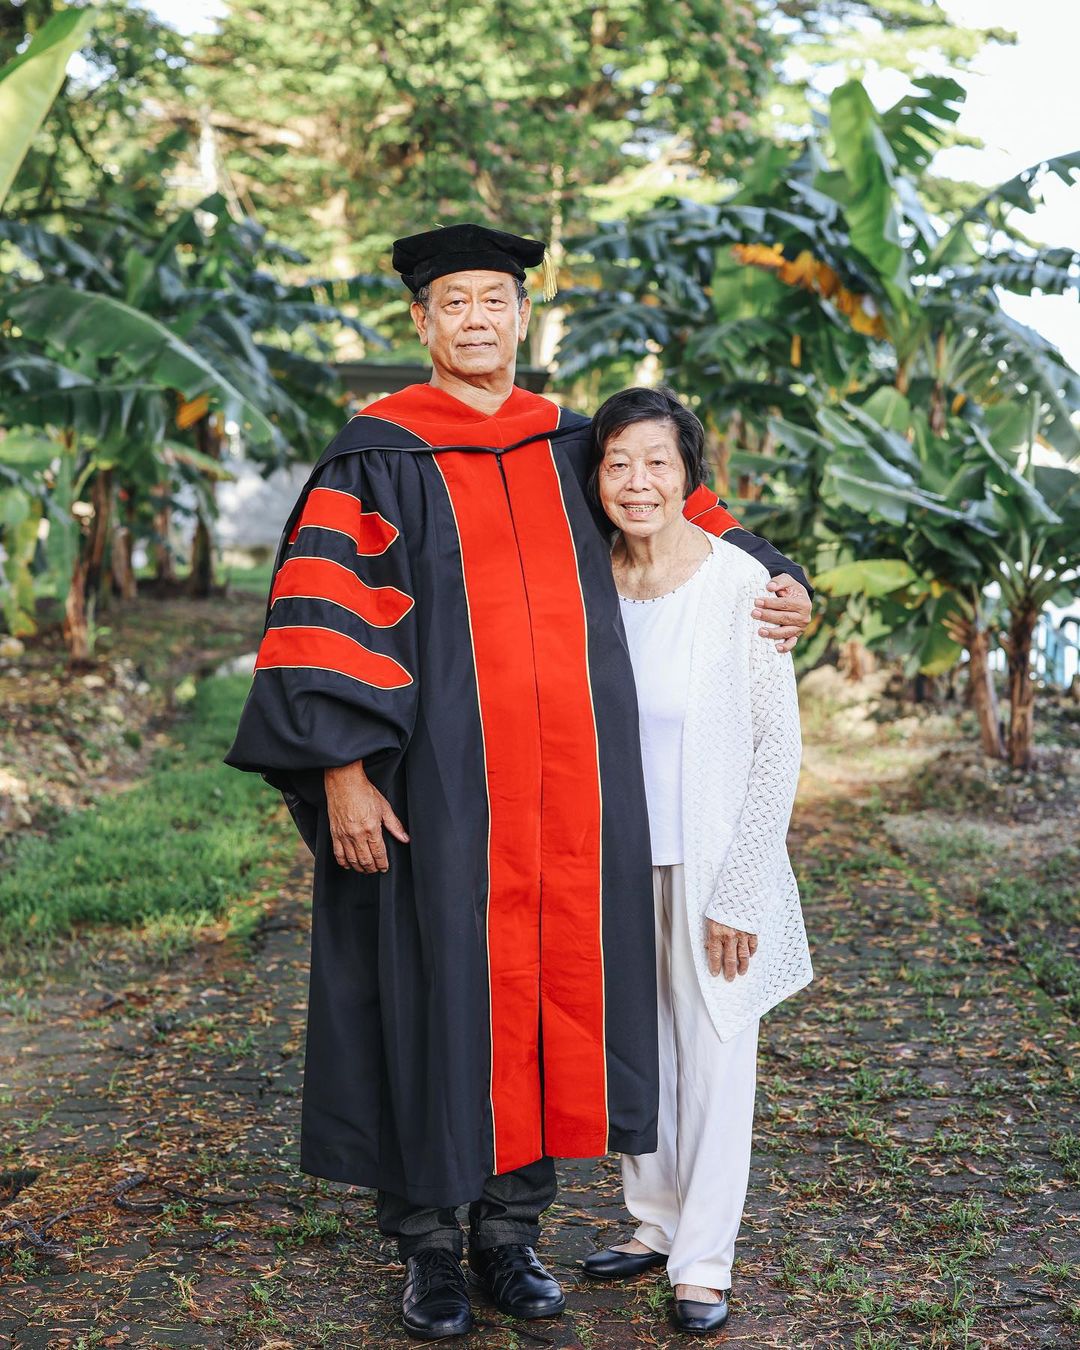 62-year-old Rev. Teo How Ken has just obtained his Doctoral Degree in Marketplace Theology. Image credit: Photo courtesy of Annice Lyn